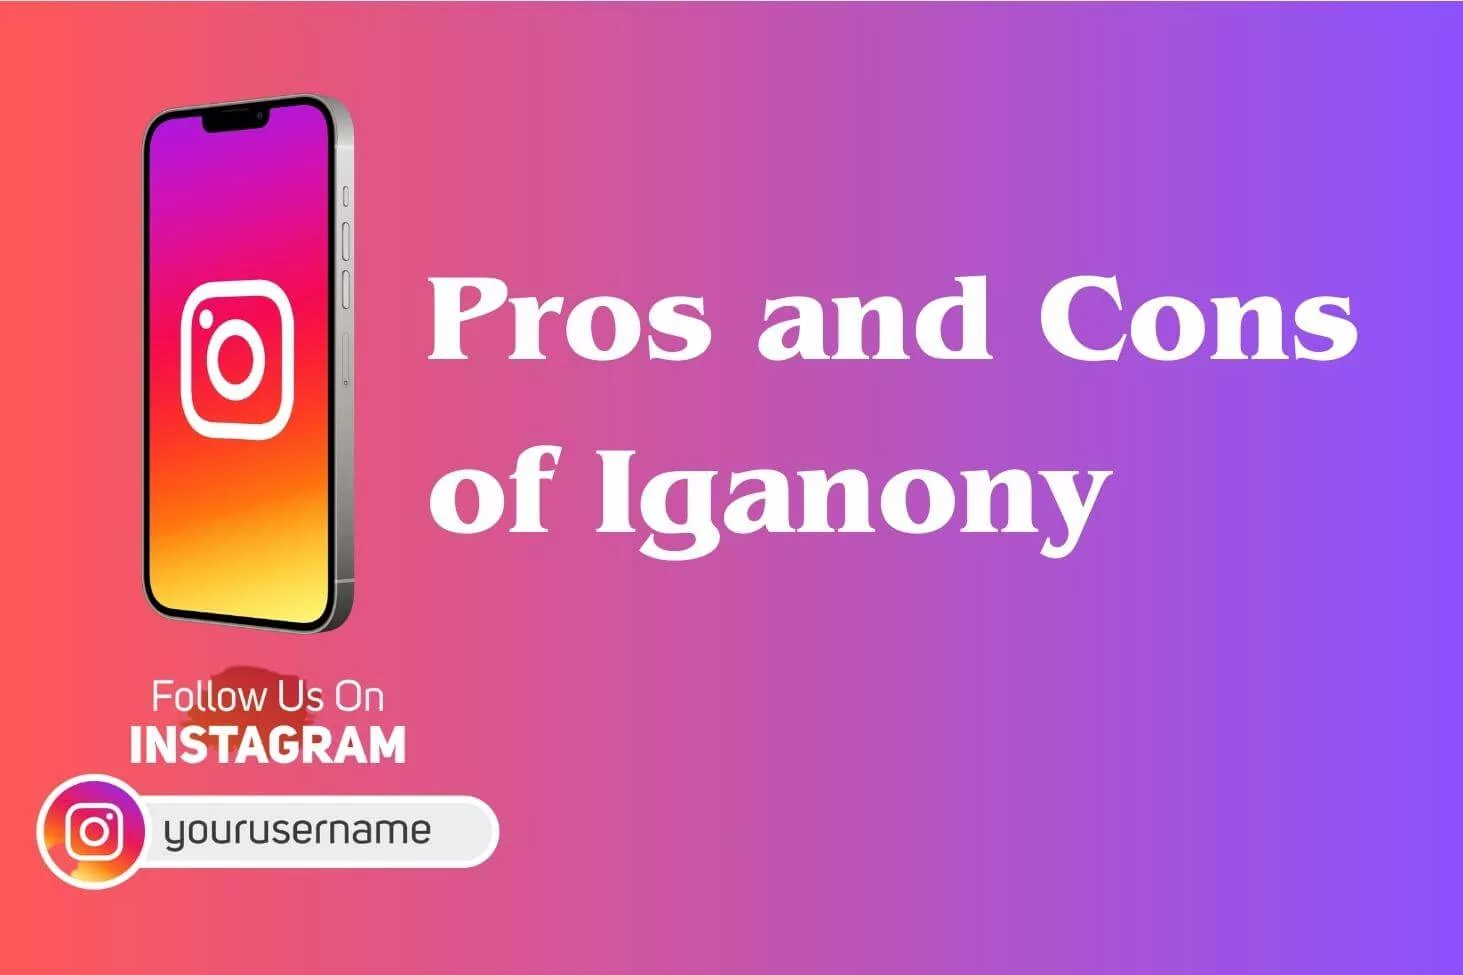 Pros and Cons of Iganony